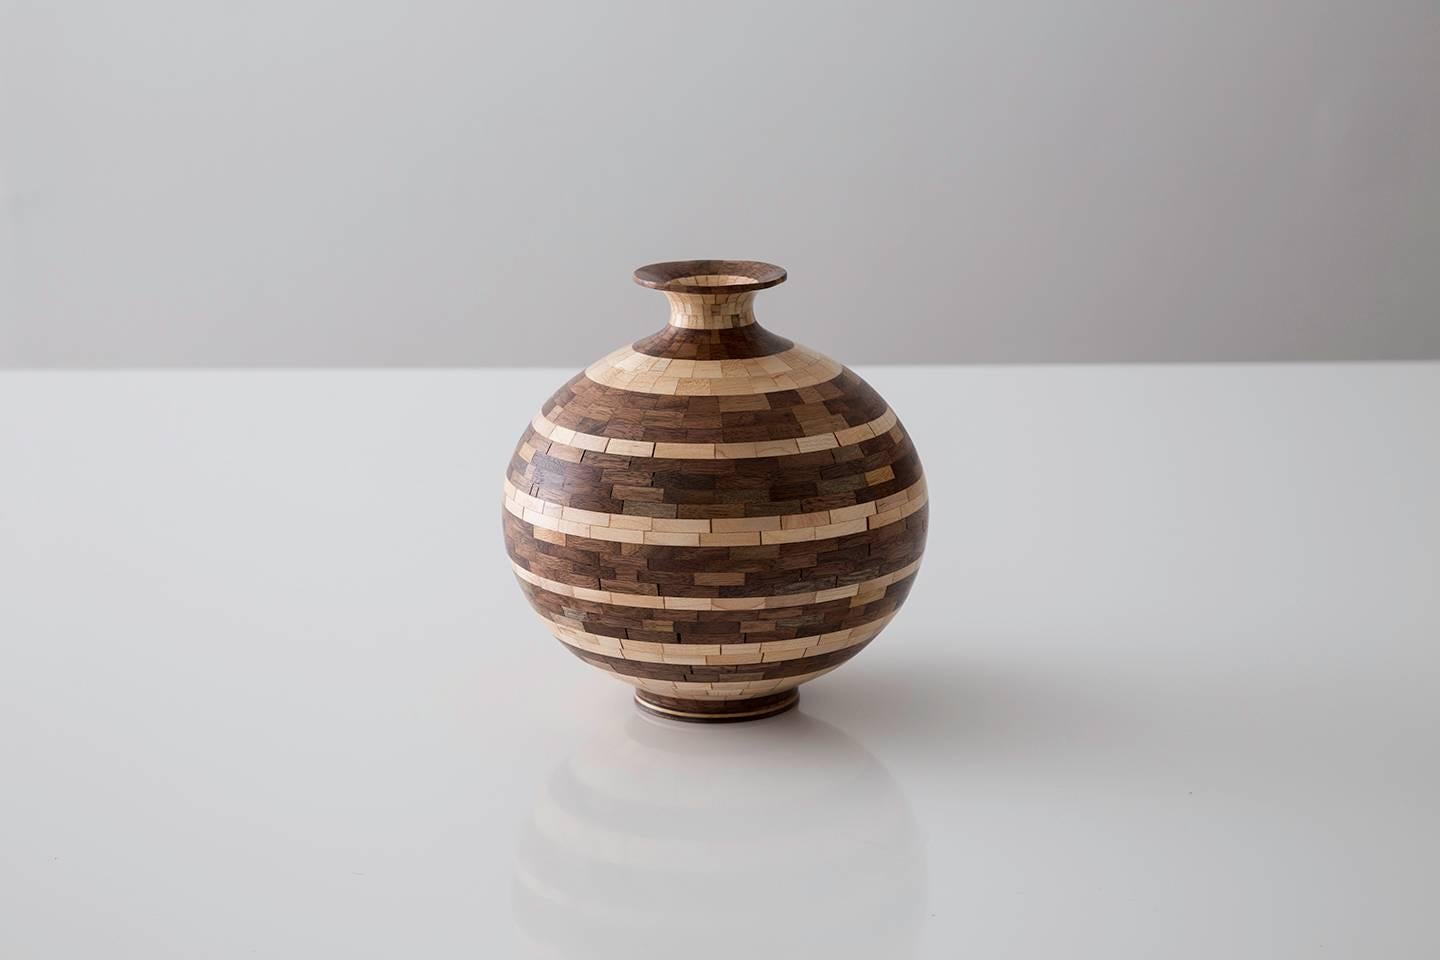 Part of Richard Haining's STACKED Collection, this vessel uses a combination of reclaimed walnut and maple. The salvaged wood offcuts were sourced from a variety of local Brooklyn wood shops. The intentional choice to use two highly contrasting